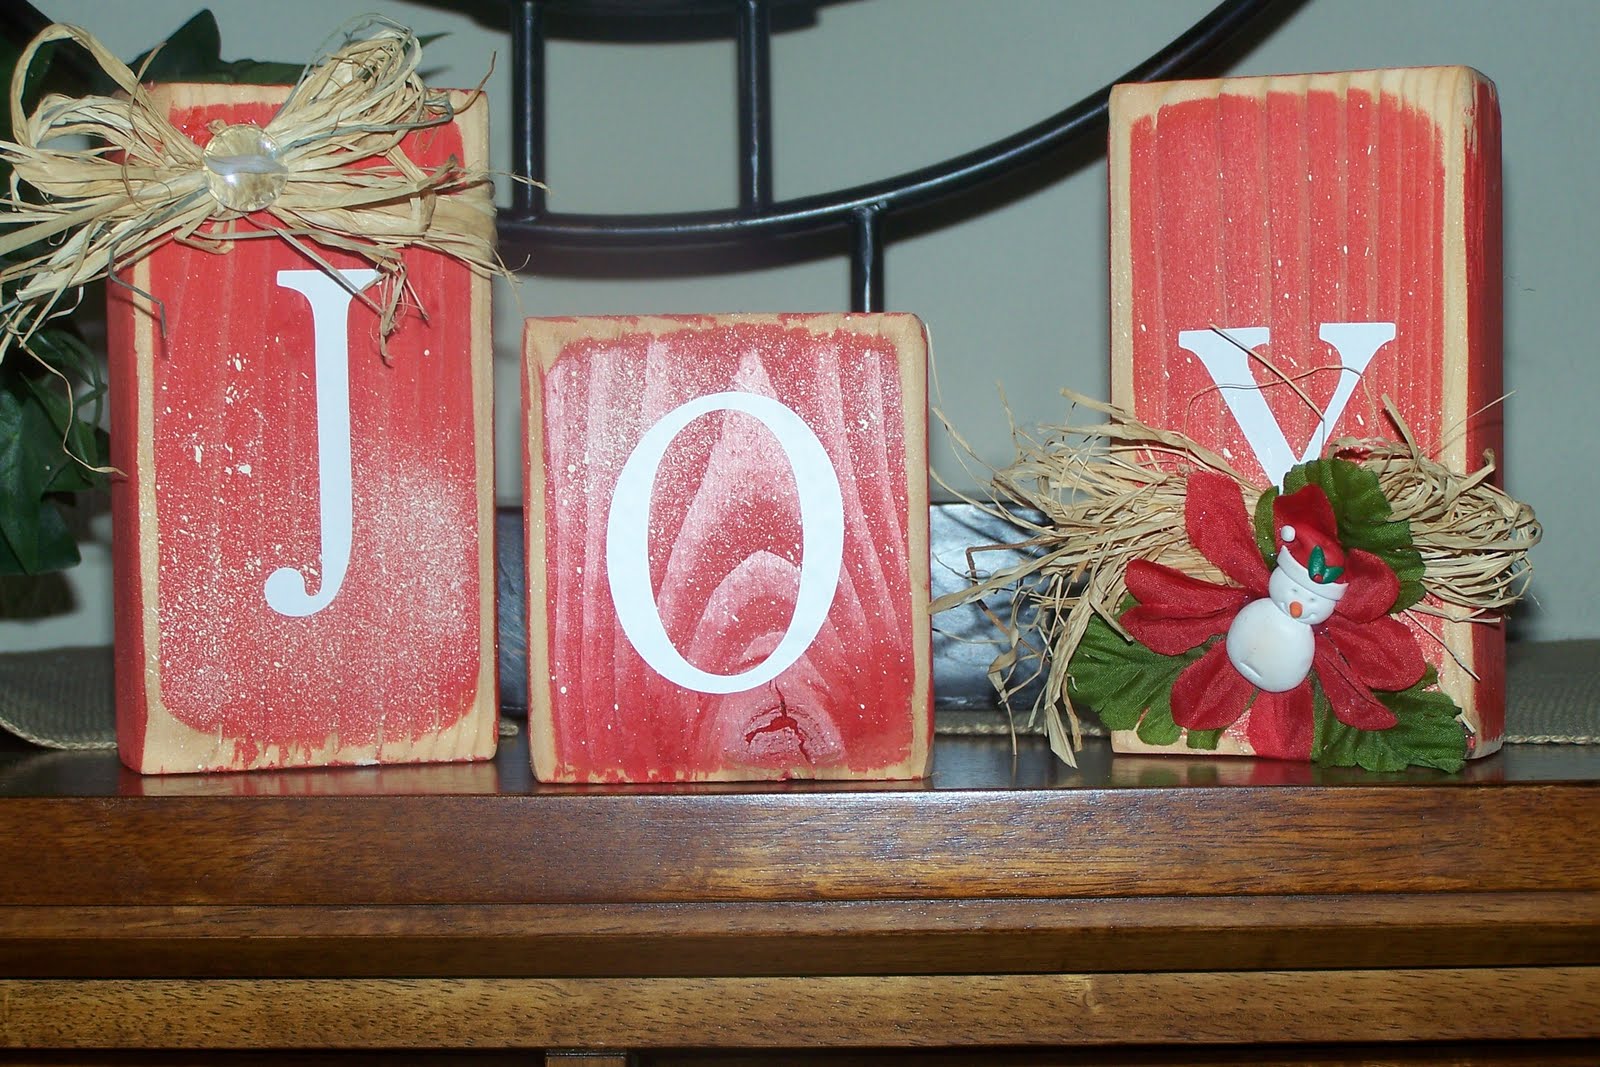 Too Cute ~n~ Crafty: New Holiday Wood Crafts for 2010